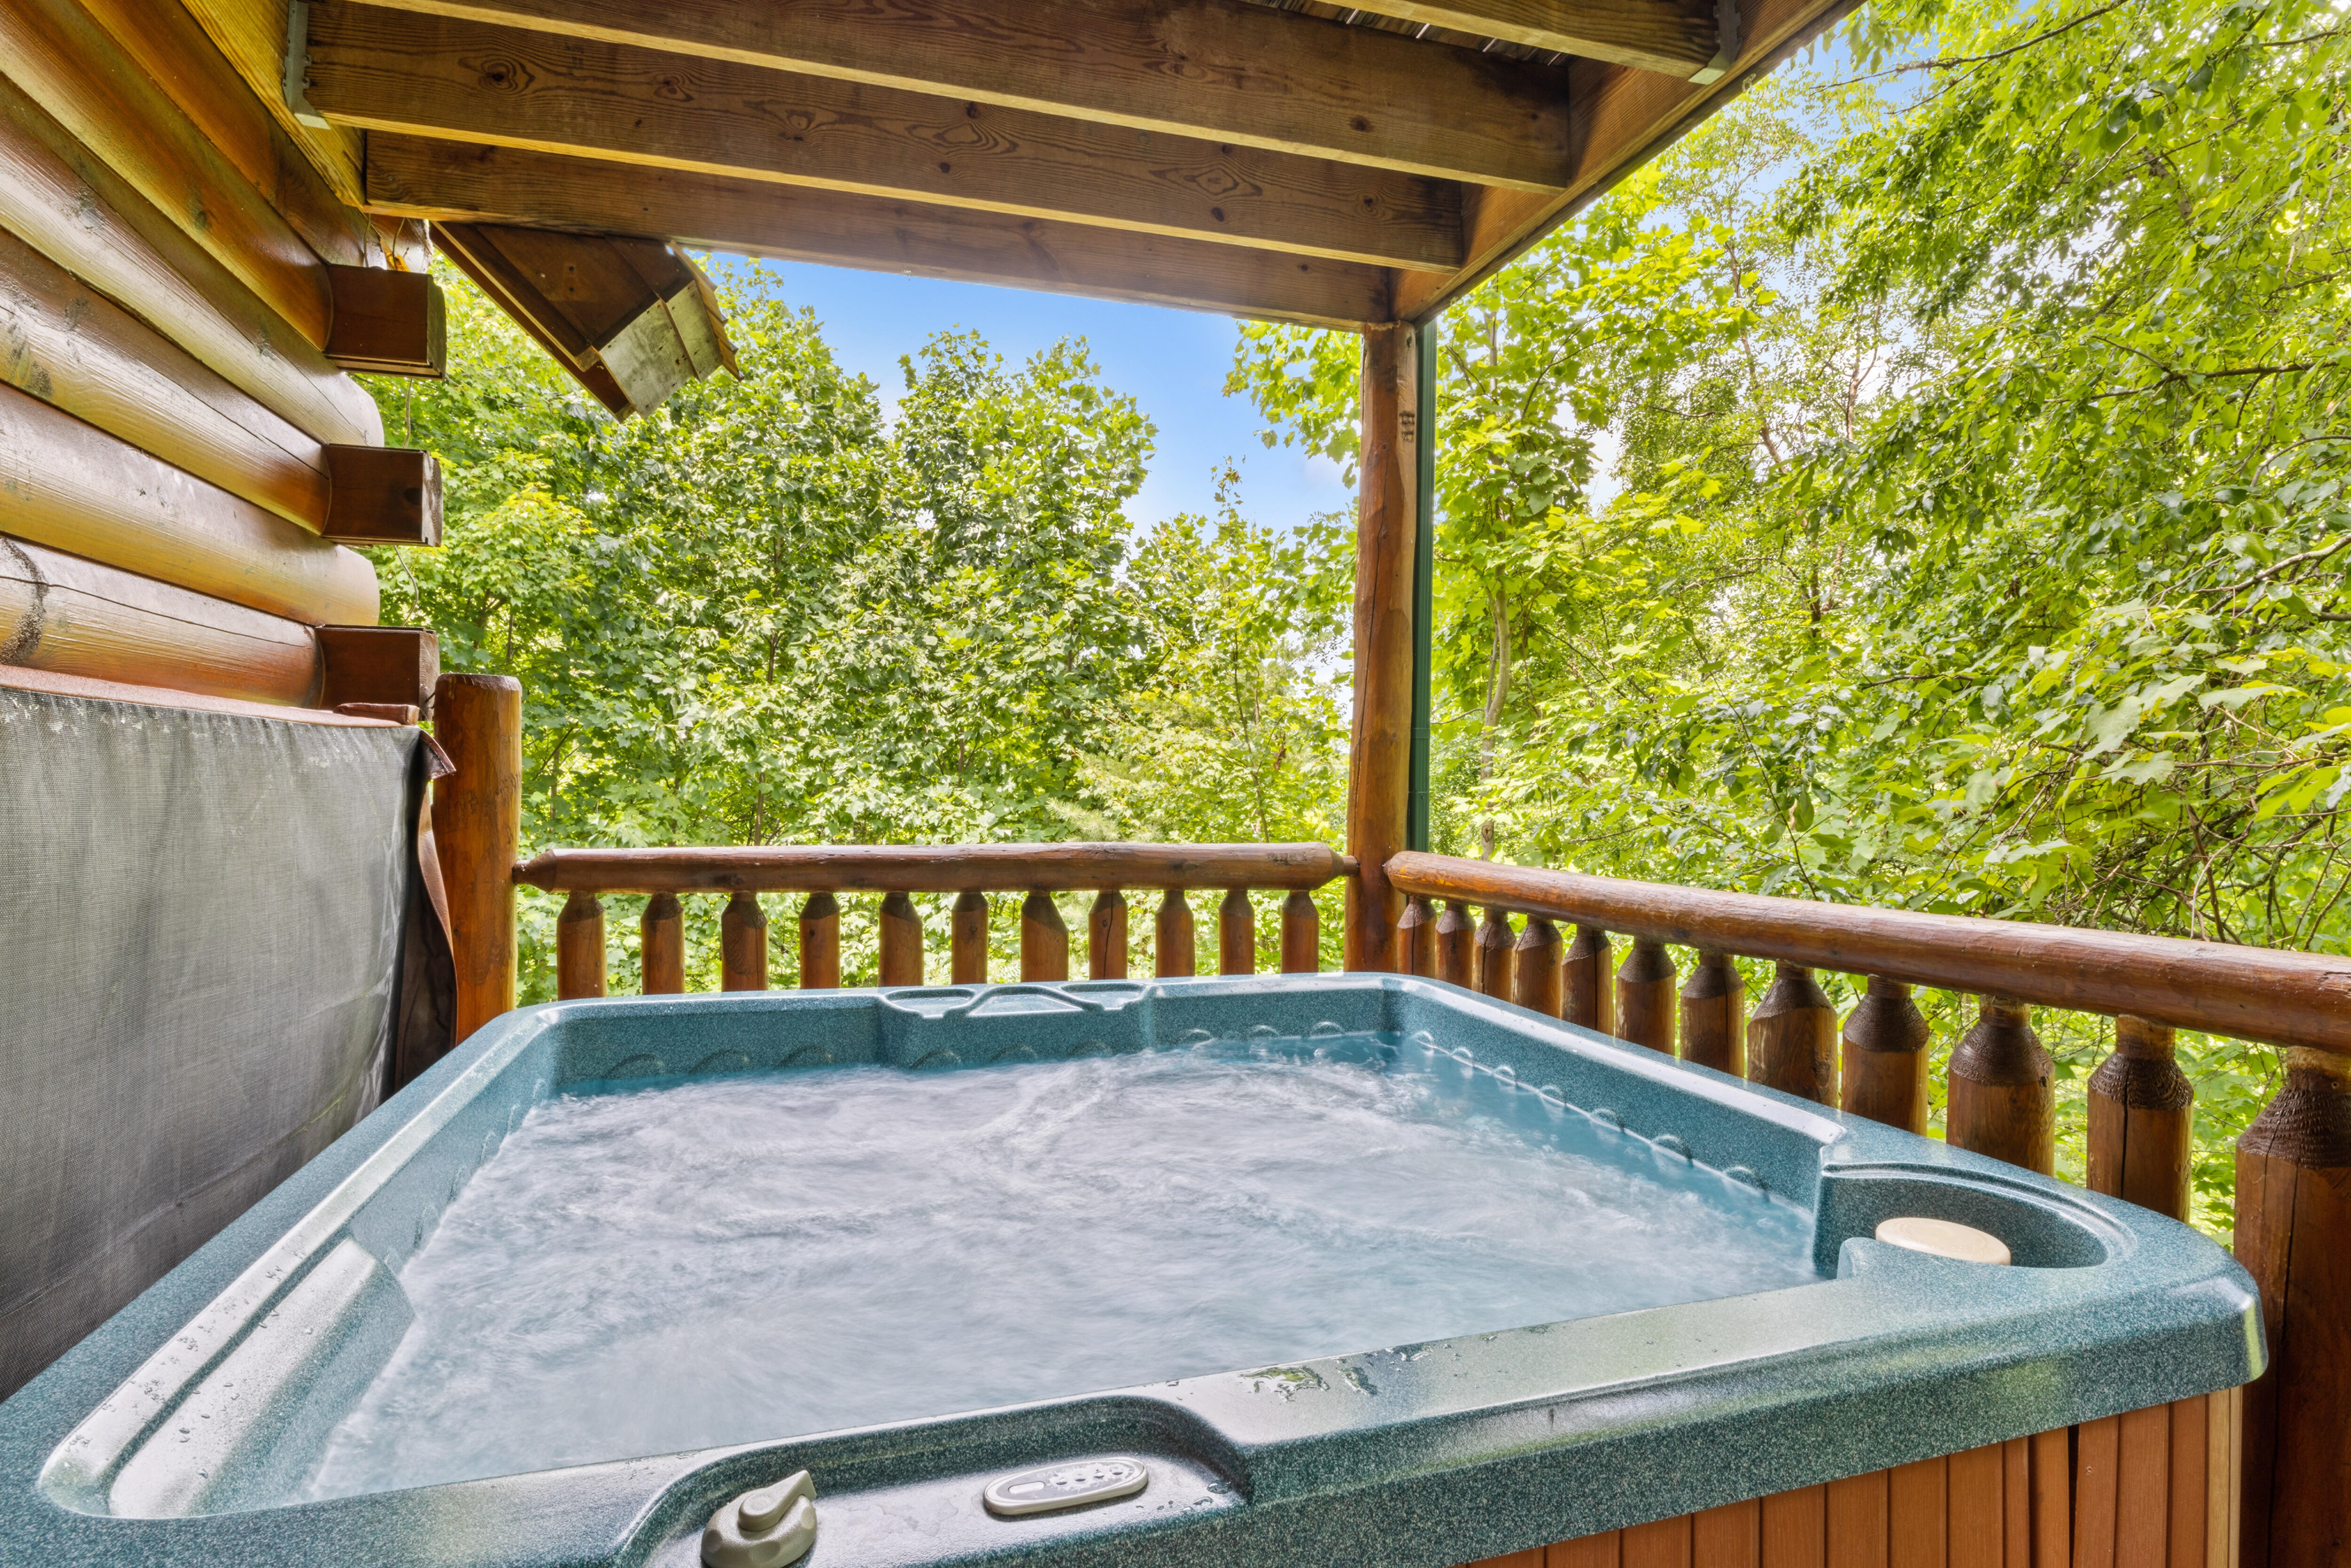 Property Image 2 - Waterfall Retreat 2 bed/2bath Cabin w/ Hot Tub, Pool Table And The Sounds Of A Natural Waterfall